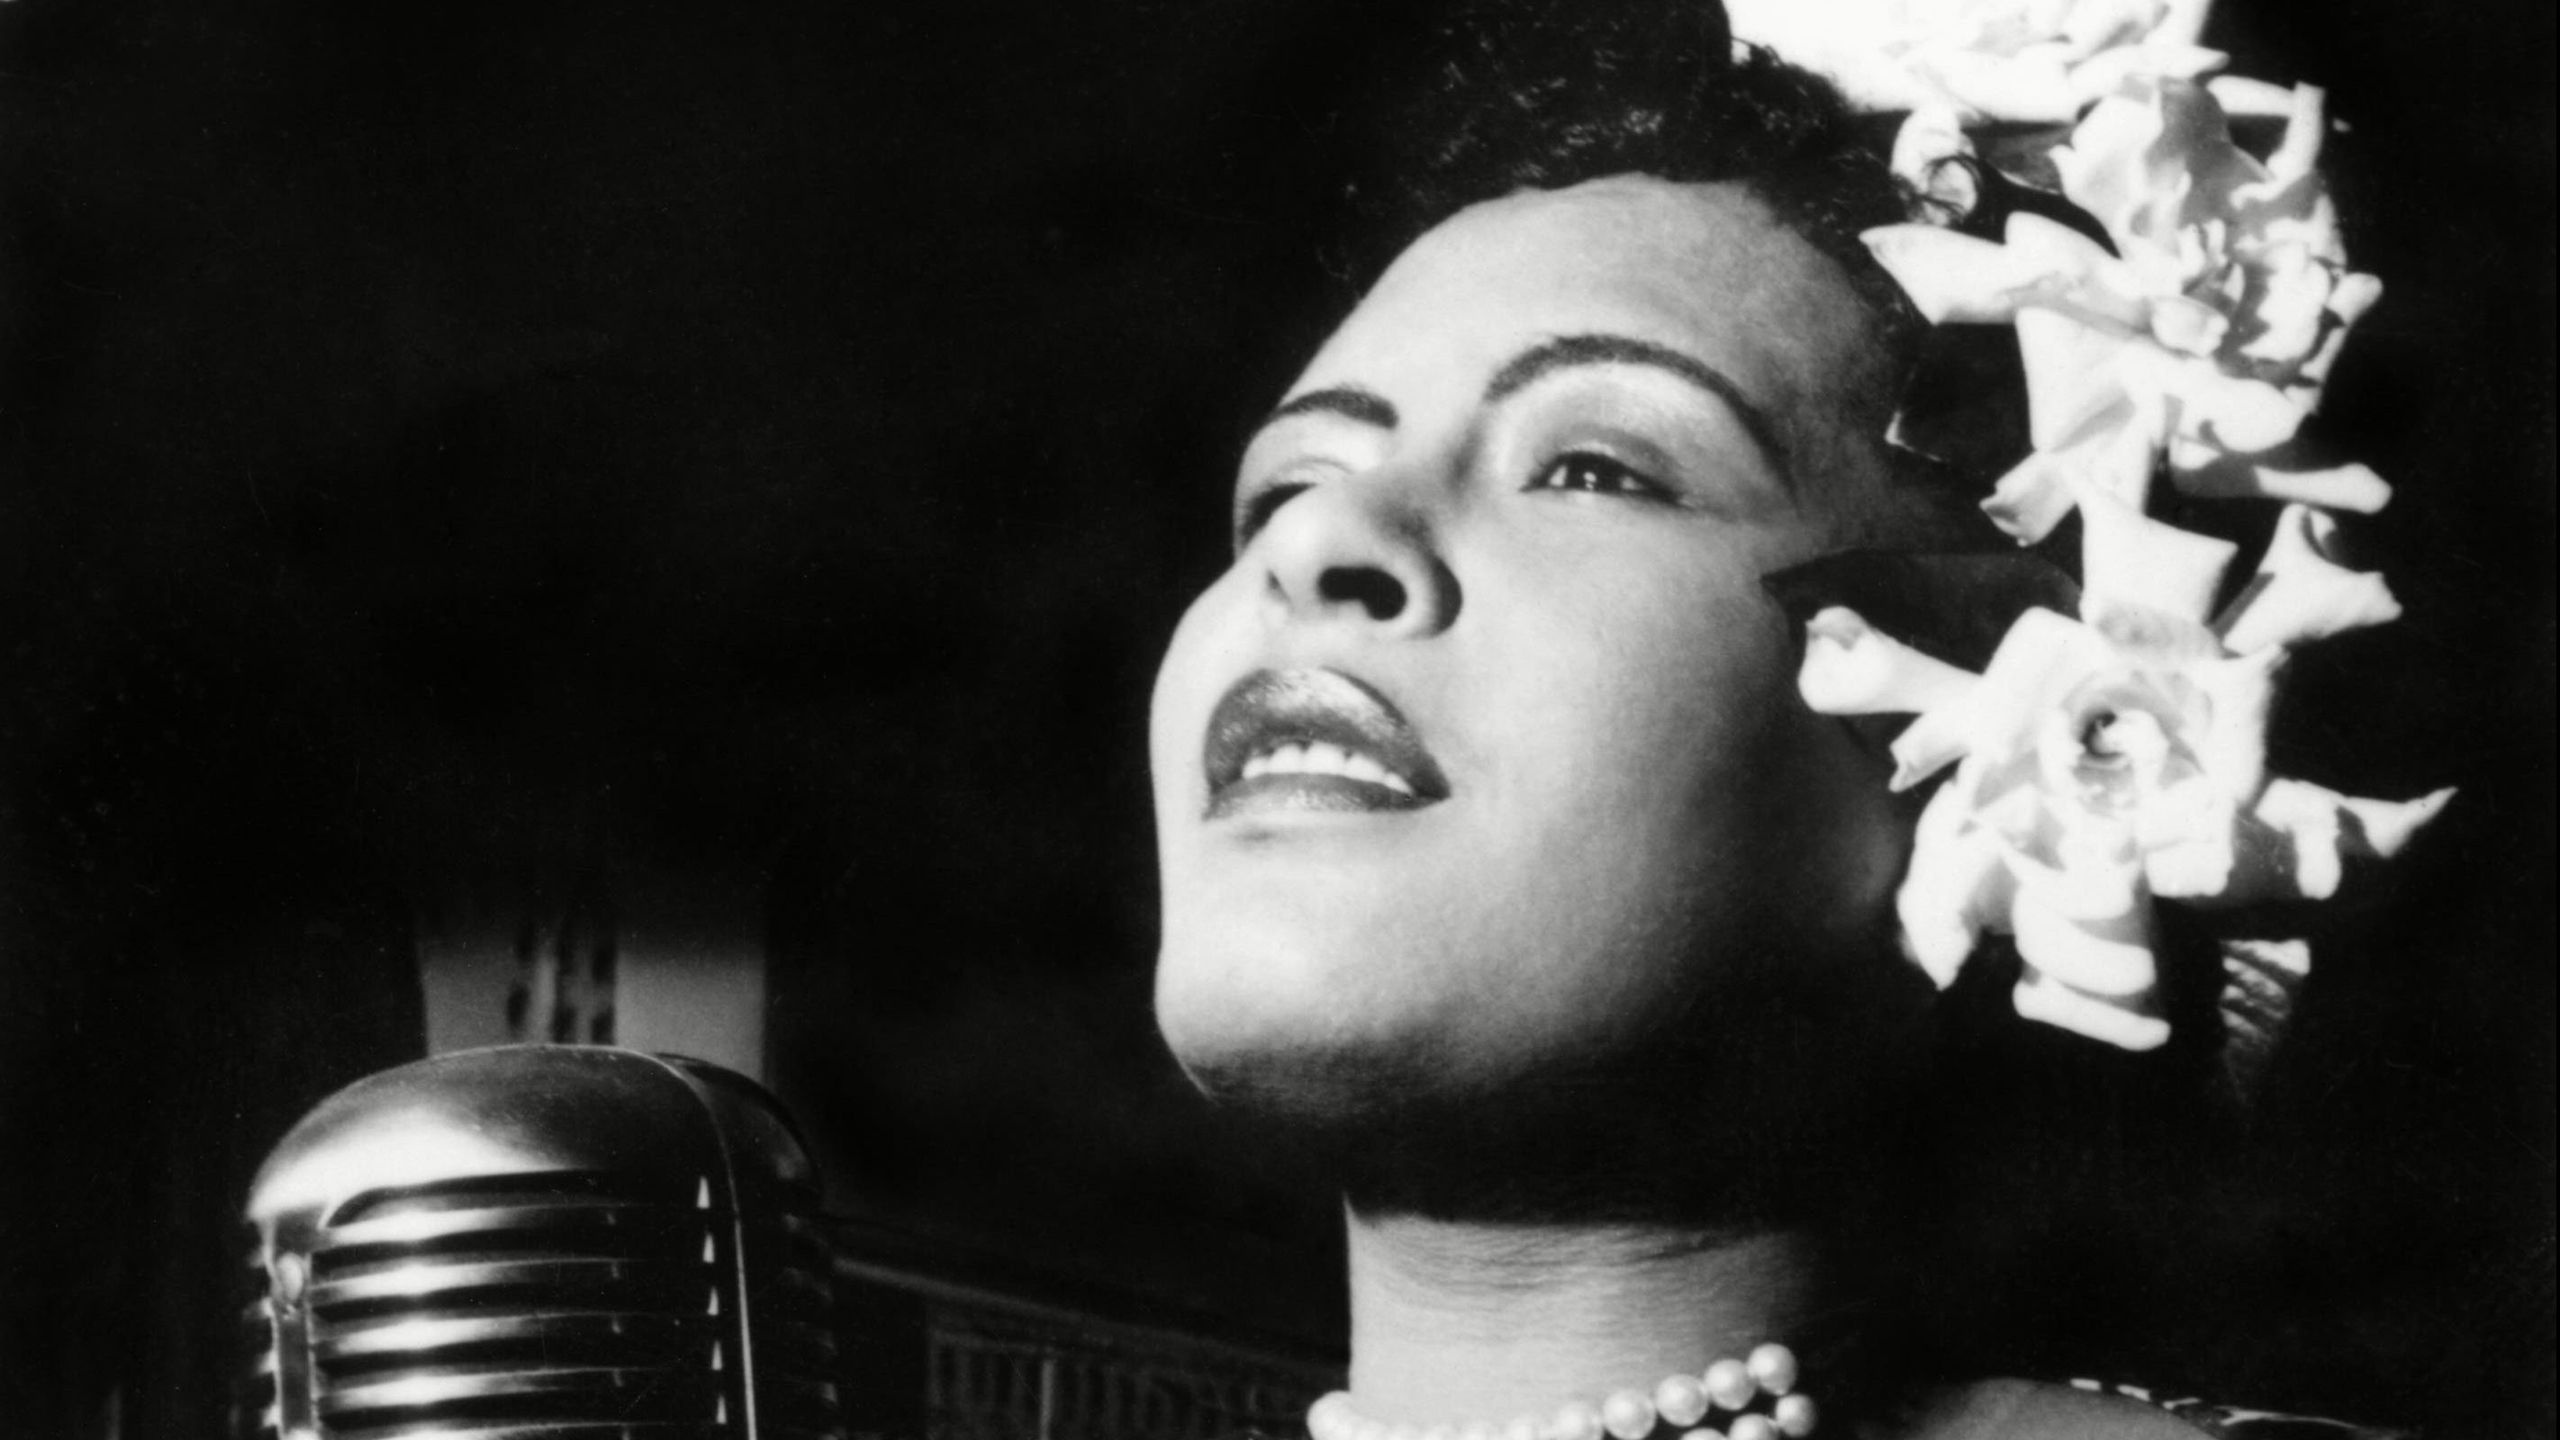 Billie Holiday, Soulful wallpapers, Timeless beauty, Jazz music icon, 2560x1440 HD Desktop